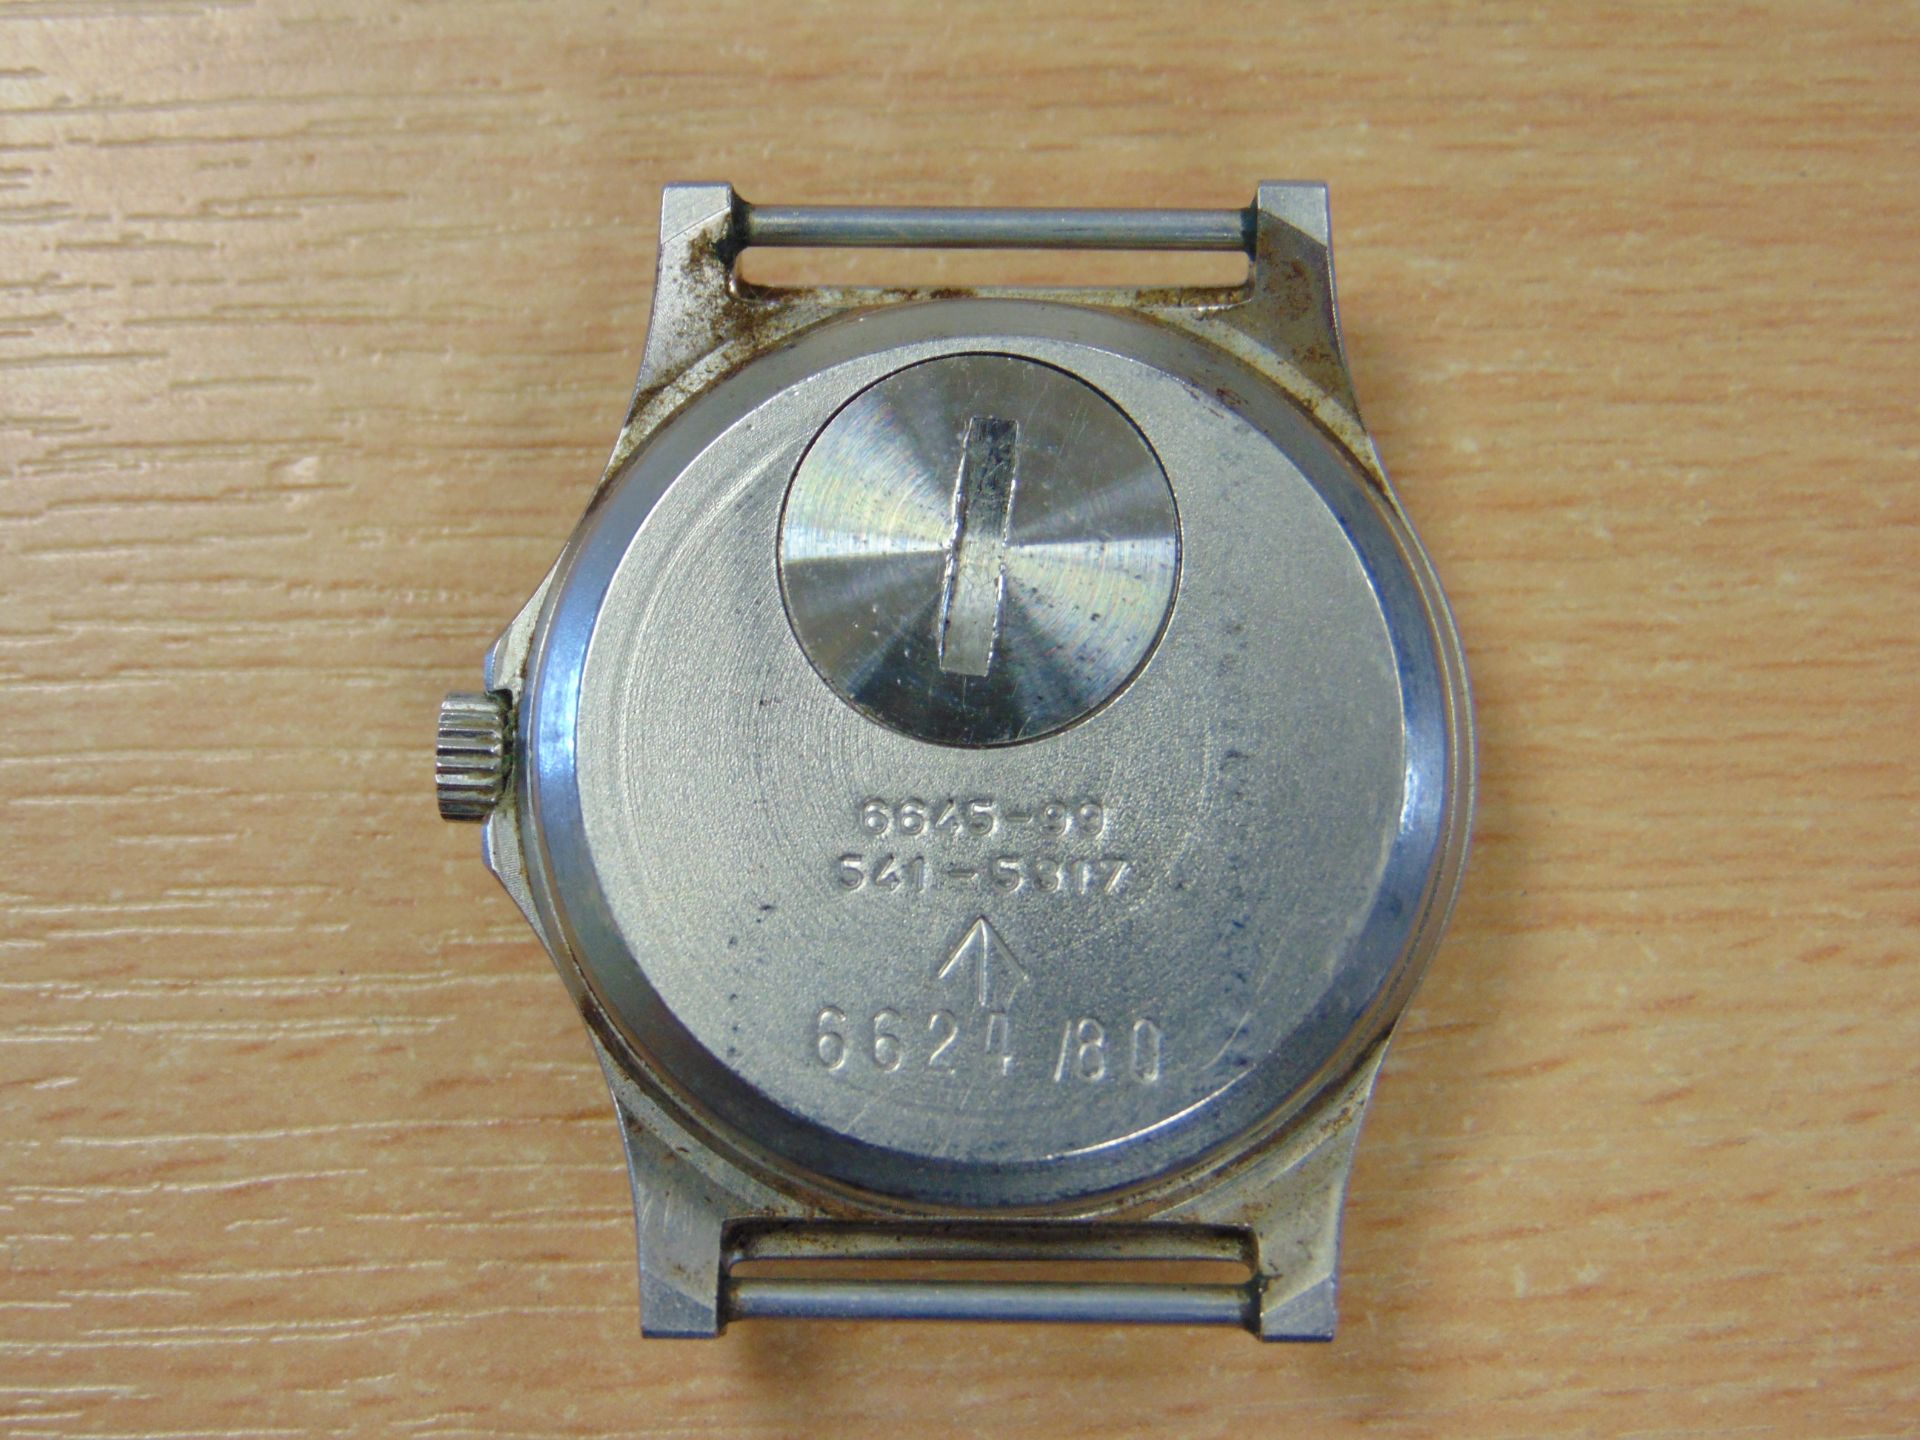 Very Rare CWC G10 British Army Fat Boy Service Watch Date 1980 - Image 4 of 4